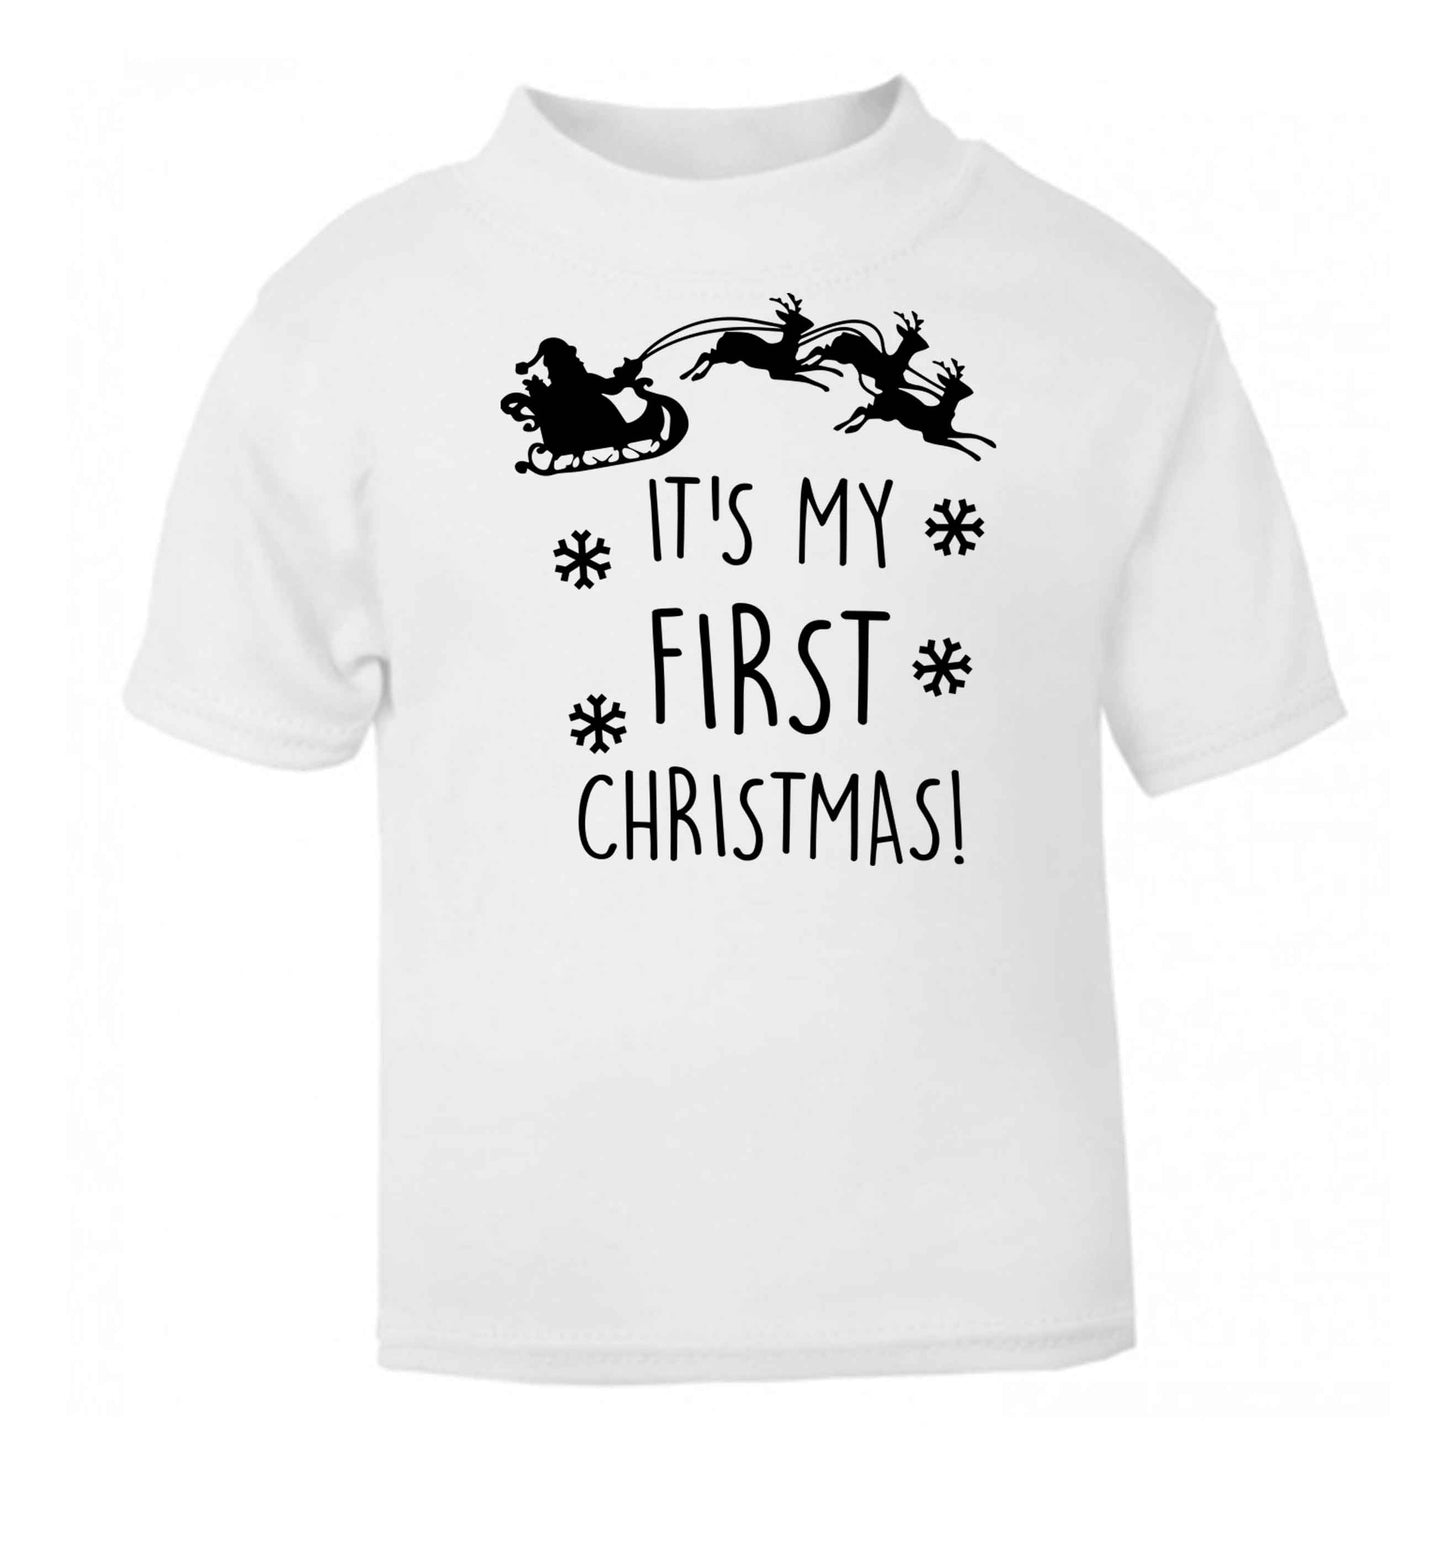 It's my first Christmas - Santa sleigh text white baby toddler Tshirt 2 Years